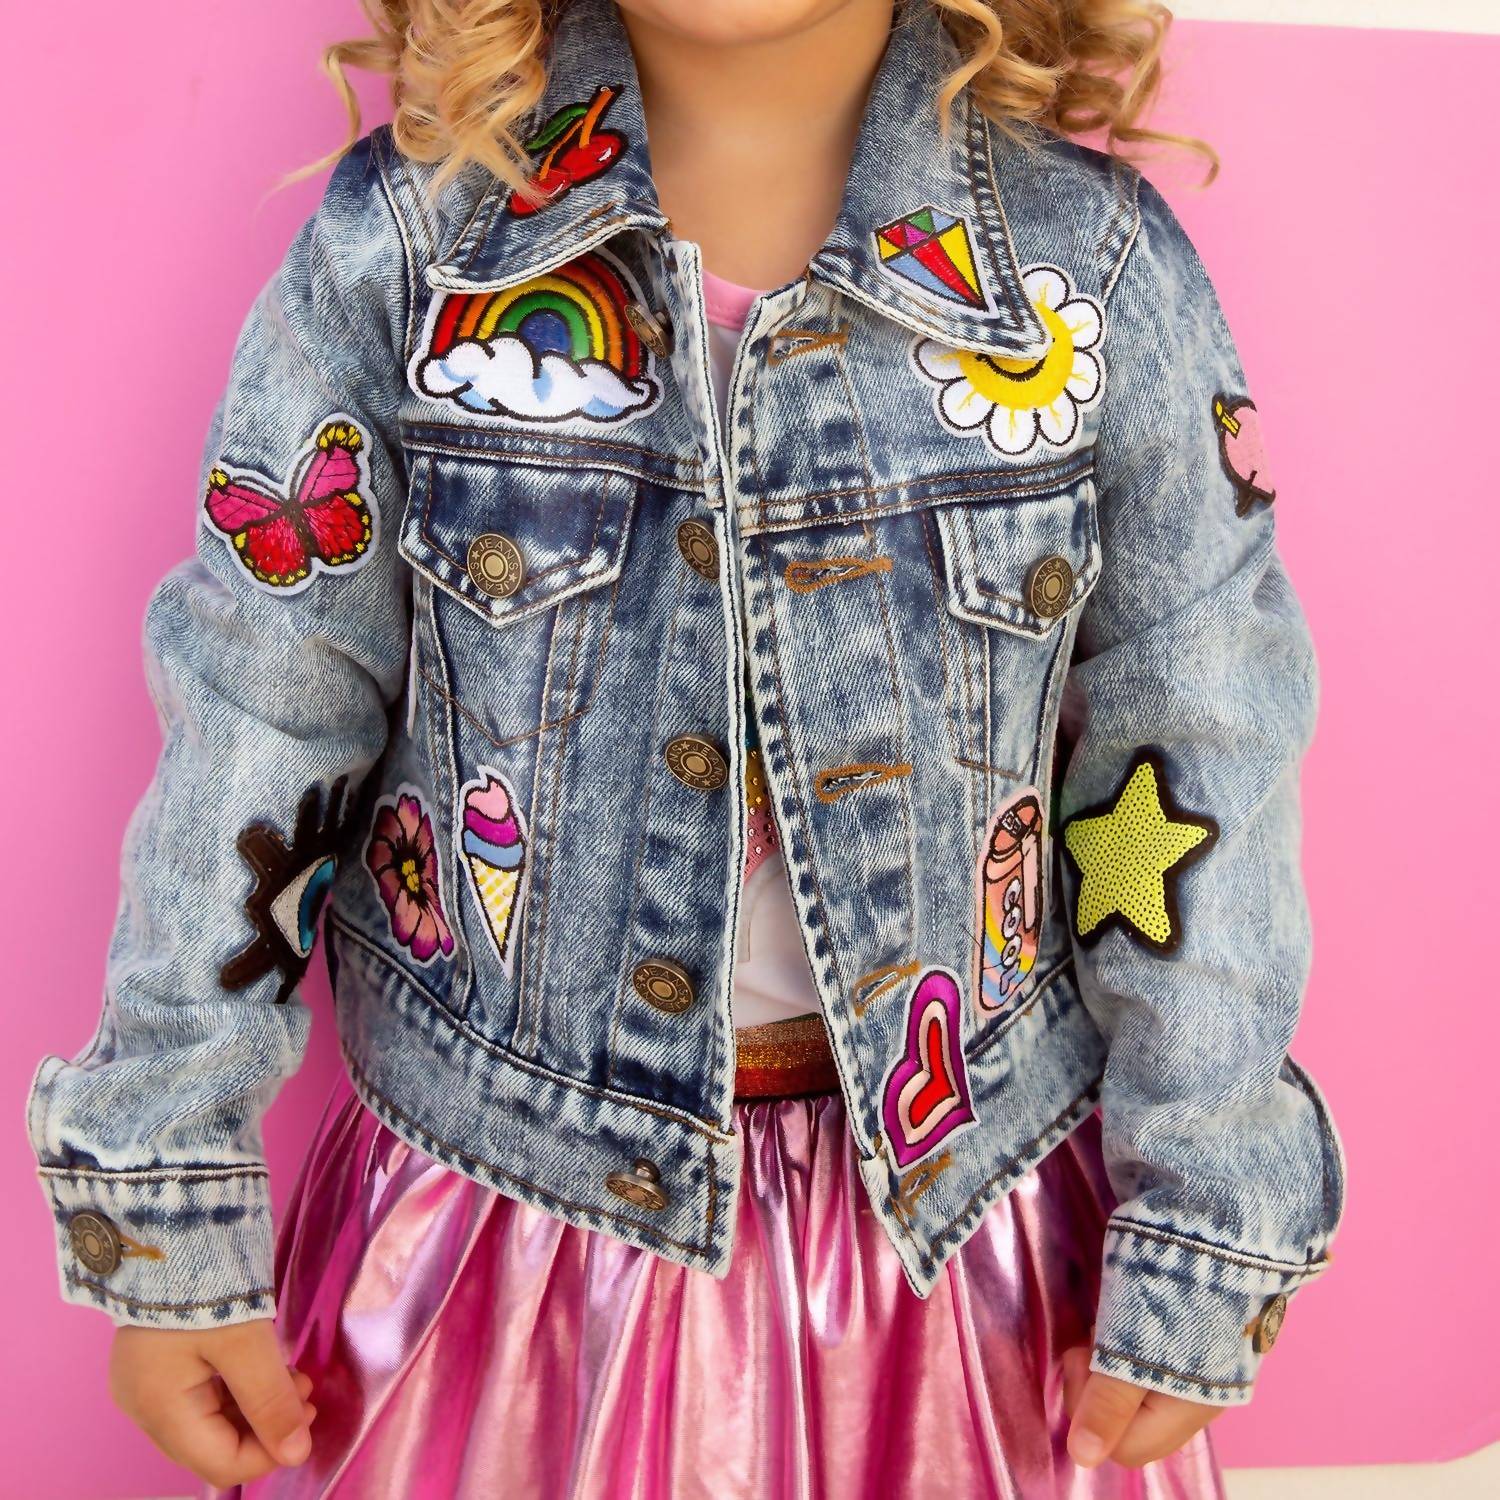 LOLA + THE BOYS All About The Patch Denim Jacket in Denim